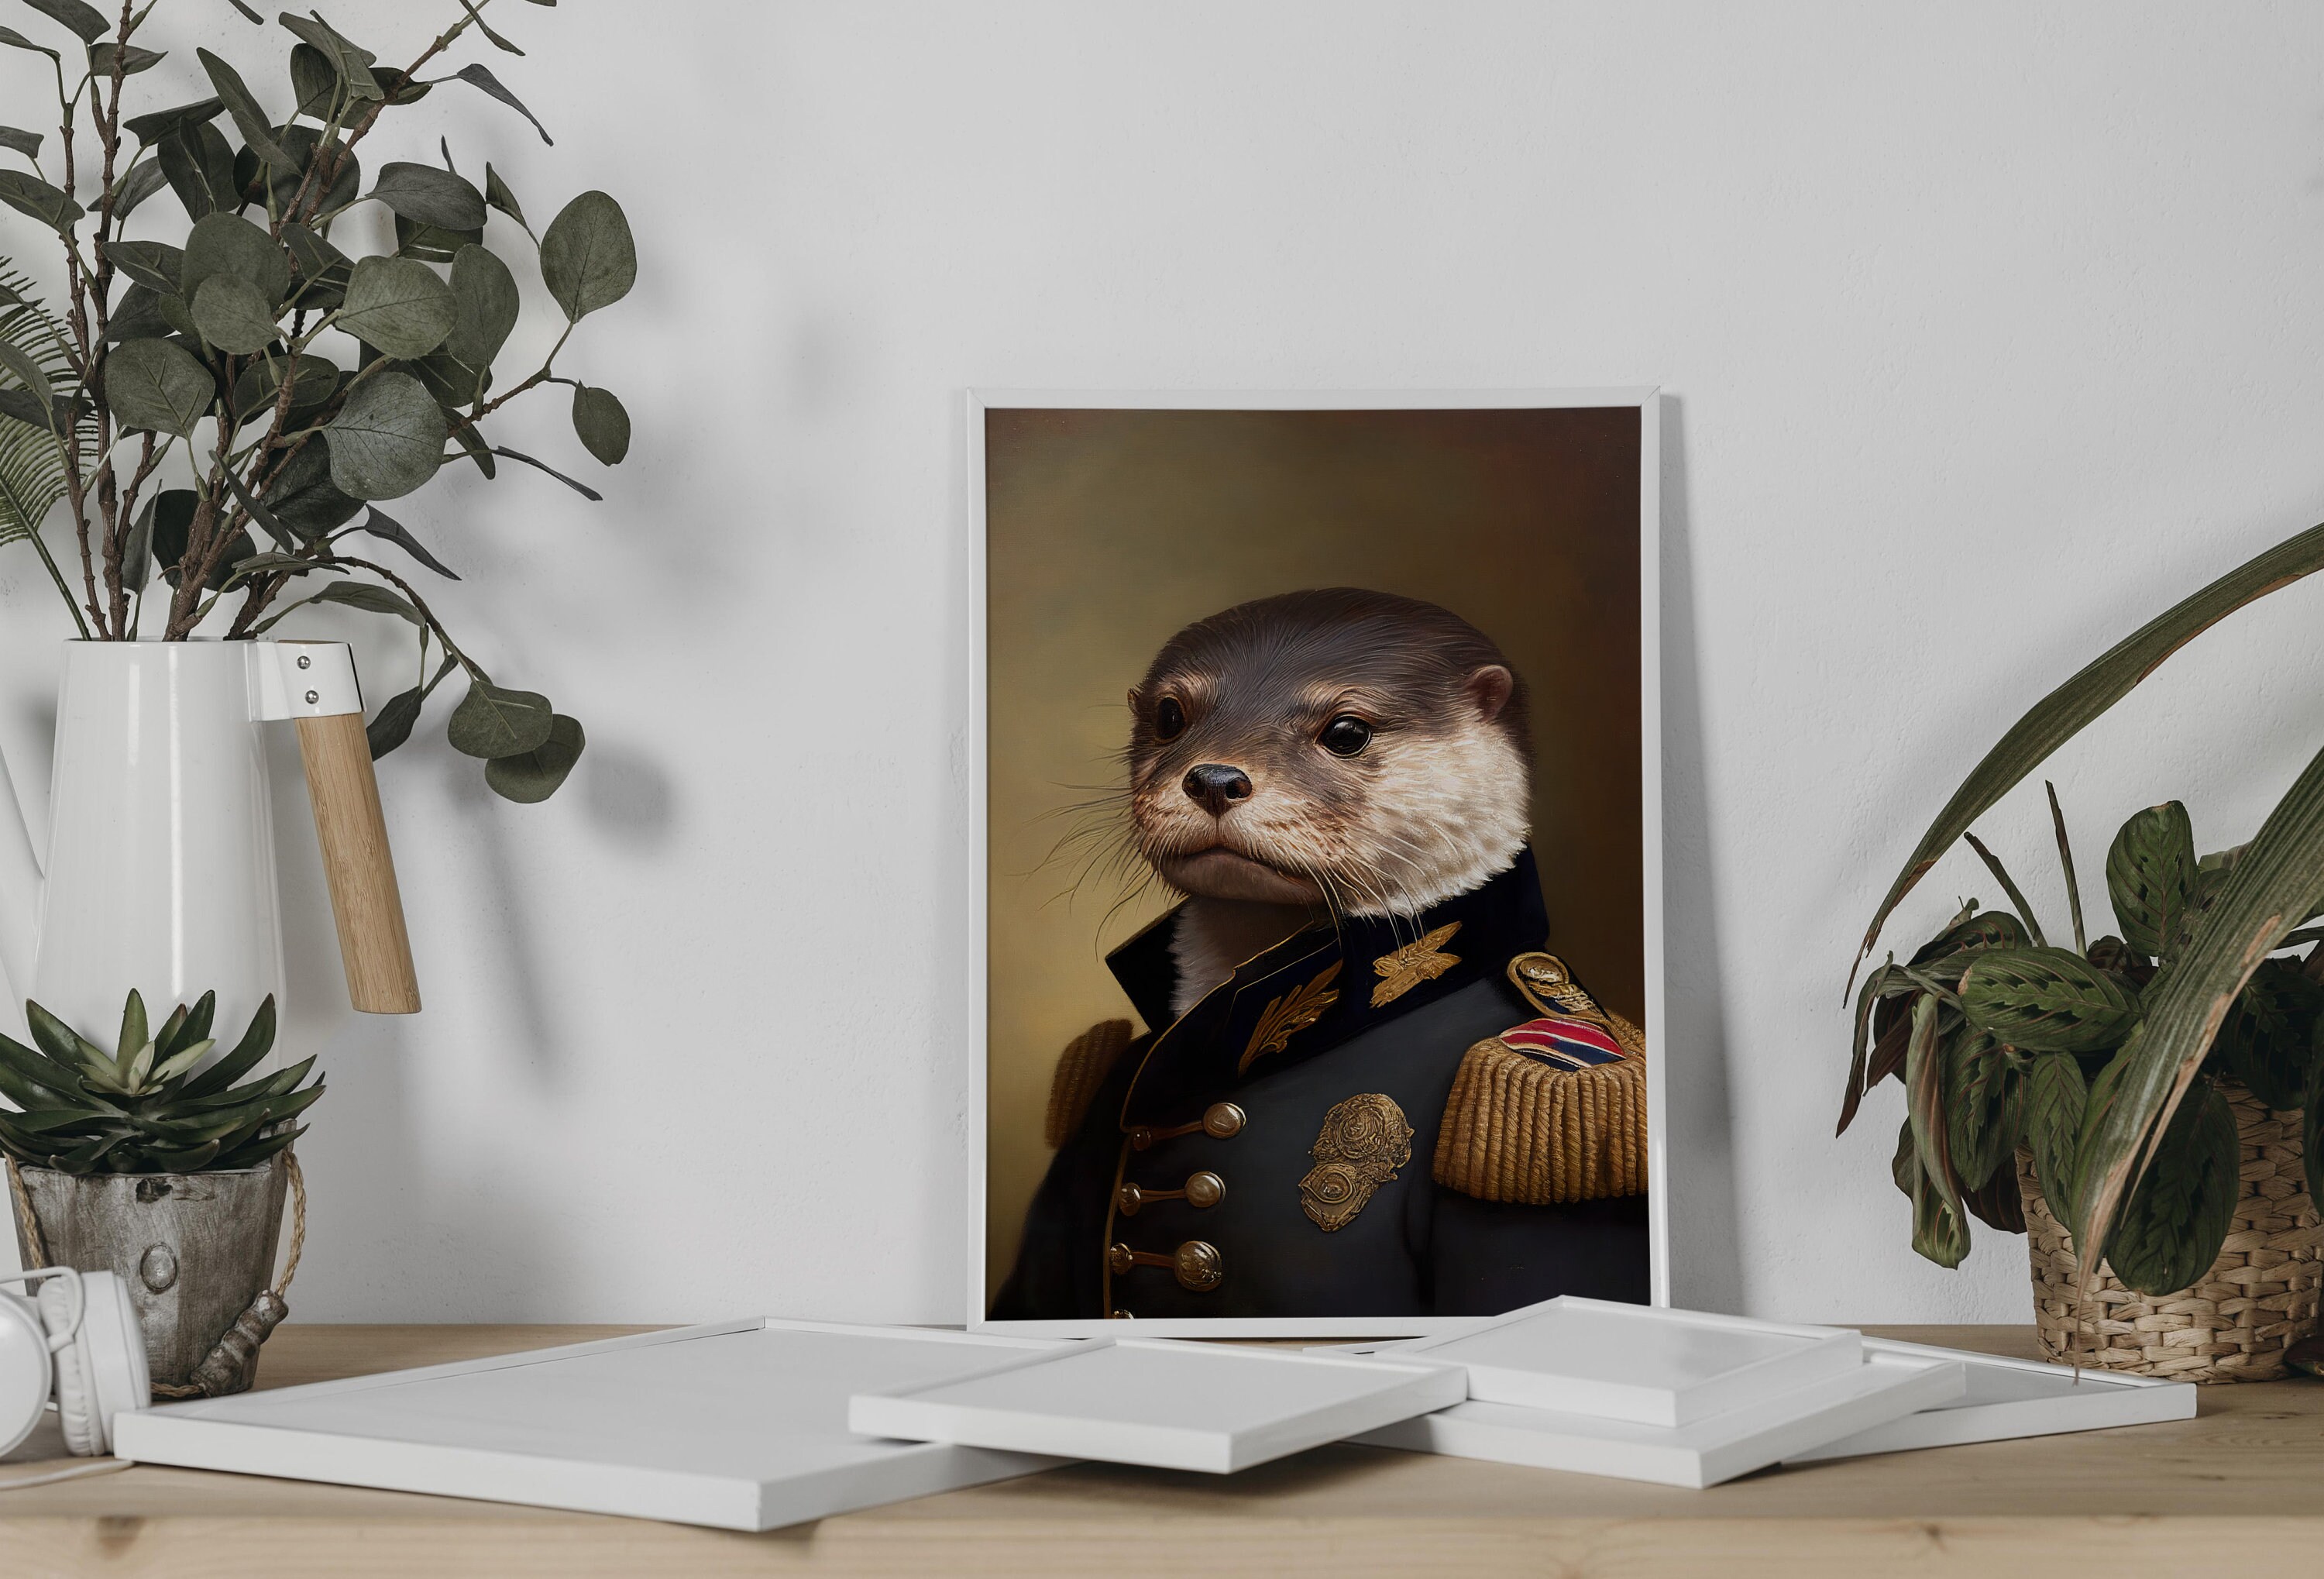 Discover Portrait of an Otter in Military Uniform, Animal Wall Decoration, Otter Poster, Otter Wall Print, Wall Art, No Frame